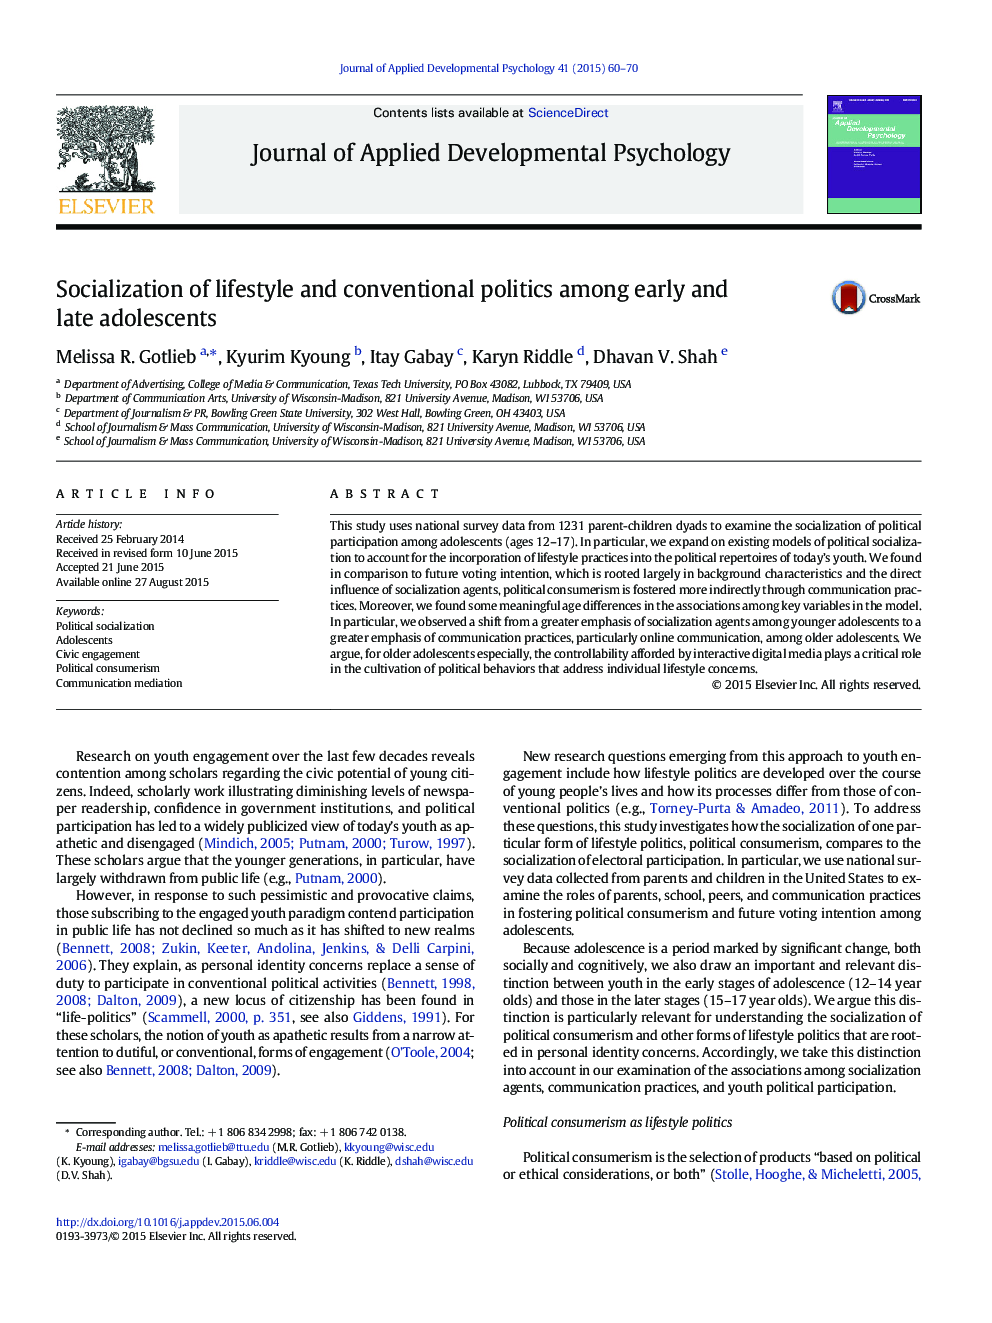 Socialization of lifestyle and conventional politics among early and late adolescents